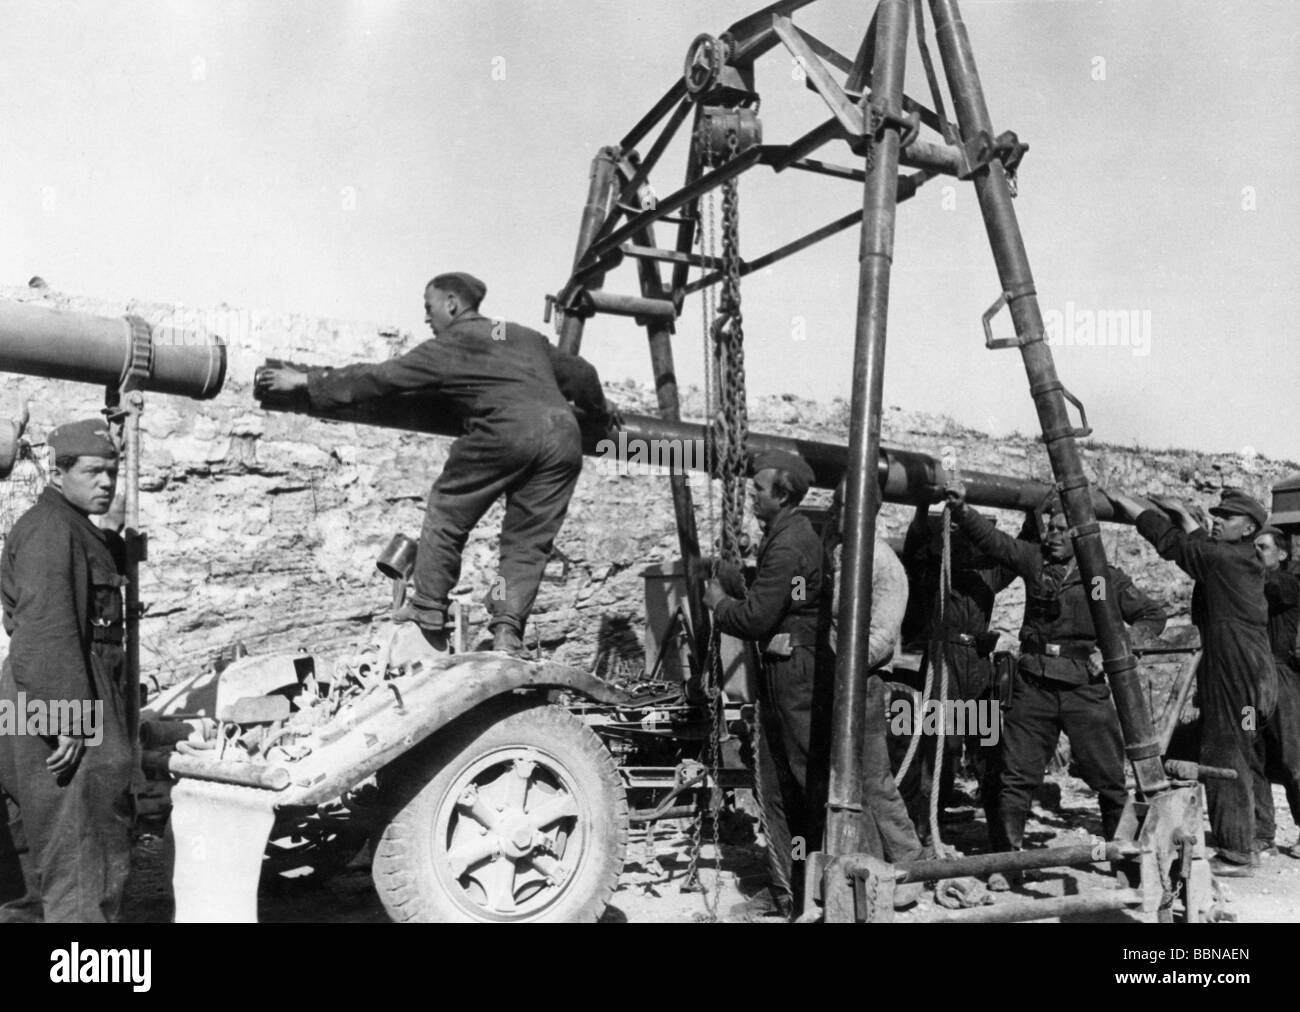 events, Second World War / WWII, Russia 1944 / 1945, Crimea, repair shop of a Luftwaffe anti-aircraft unit at Sevastopol, April 1944, changing the barrel of an 8.8 cm Flak 18/36, USSR, Soviet Union, 20th century, historic, historical, Ukraine, Eastern Front, repairing, mechanic, mechanics, soldiers, gun, crane, Wehrmacht, Third Reich, Germany, AA, antiaircraft, 88 mm, people, 1940s, Stock Photo